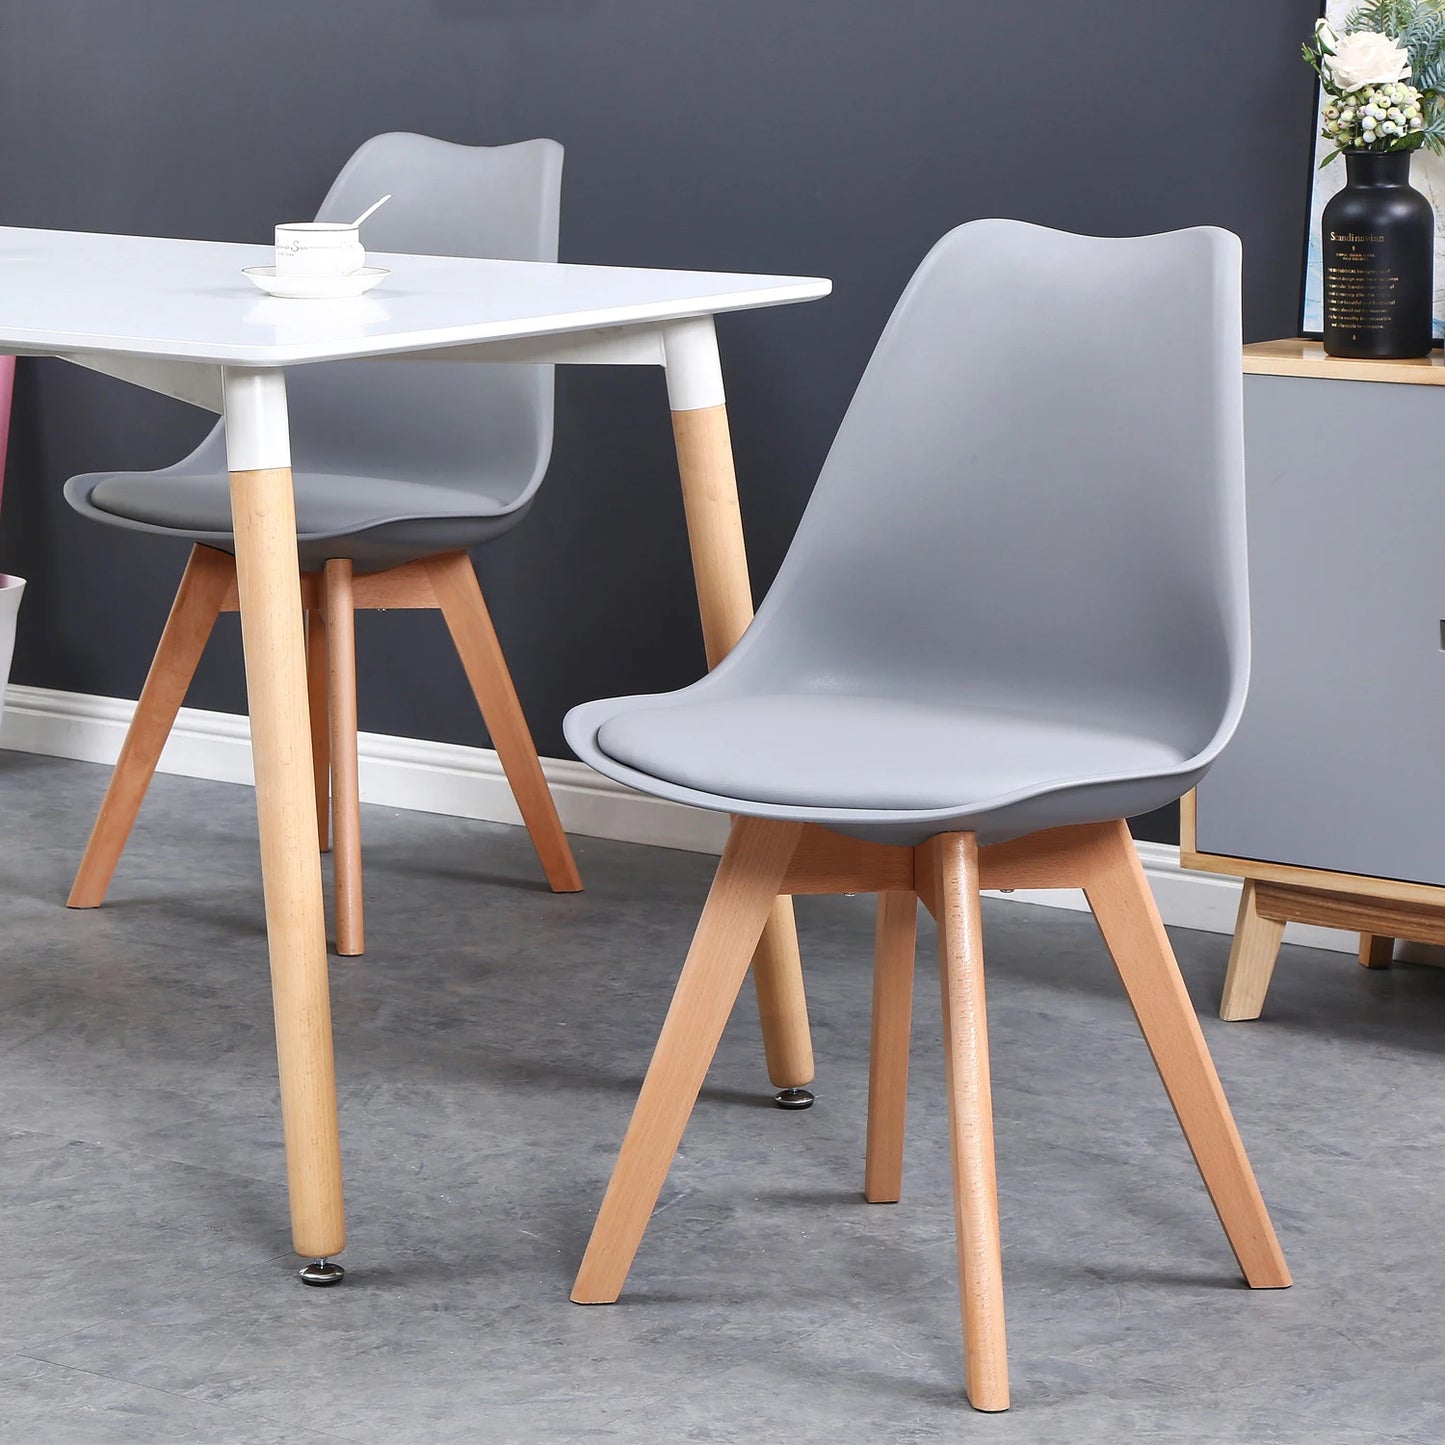 Set of 4 / 6 Gray Modern Chairs